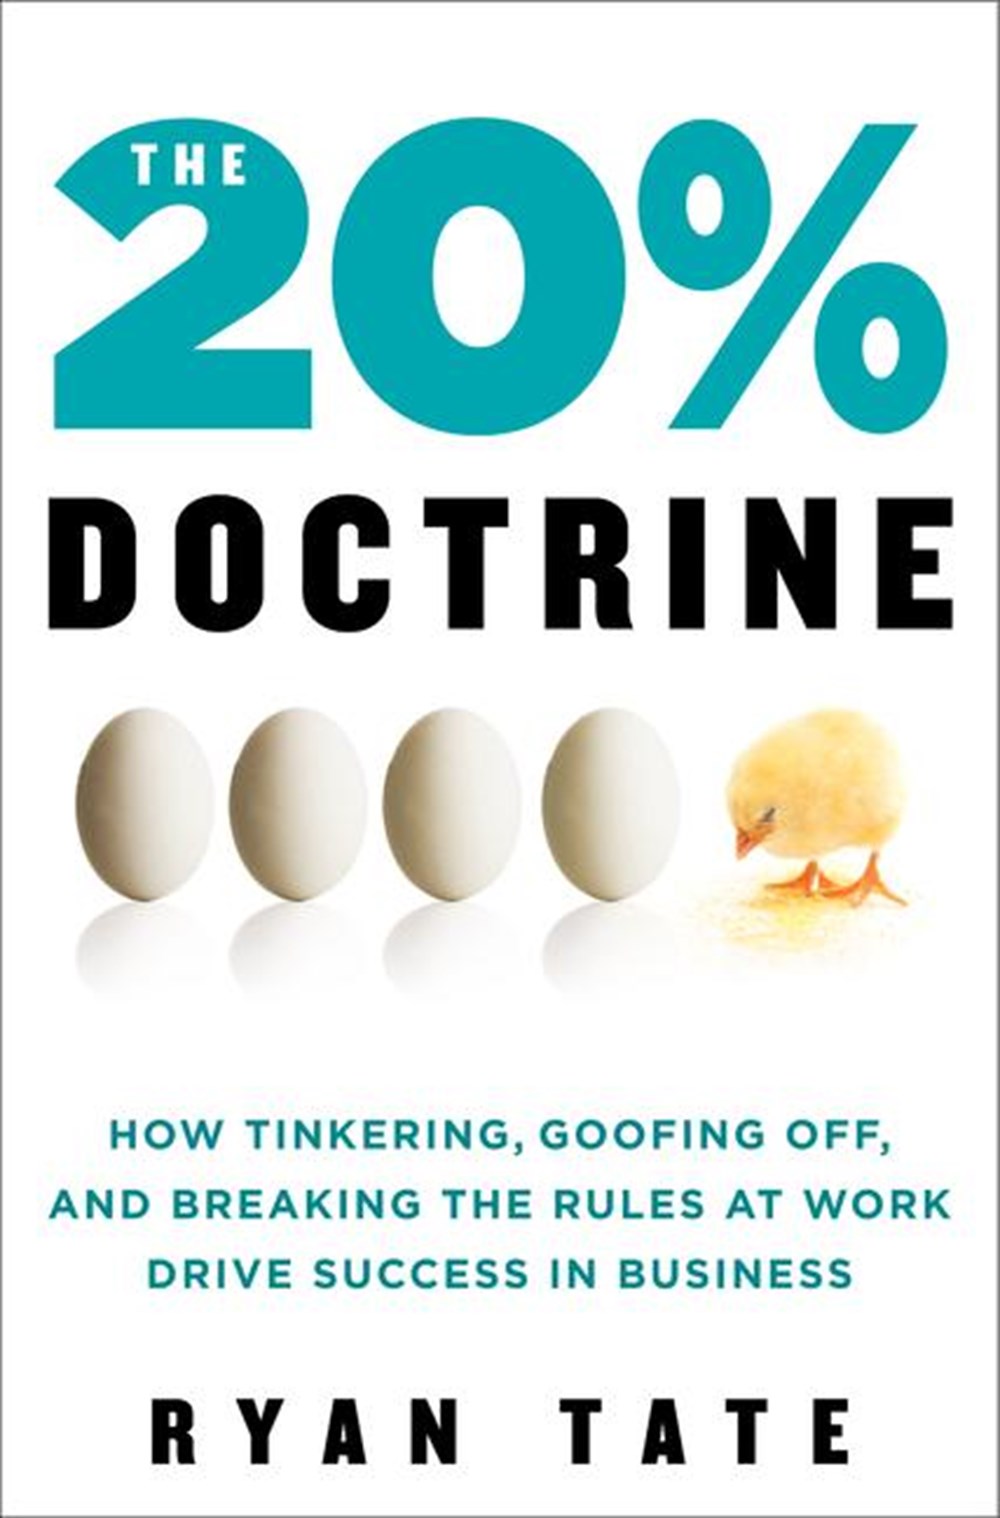 20% Doctrine How Tinkering, Goofing Off, and Breaking the Rules at Work Drive Success in Business